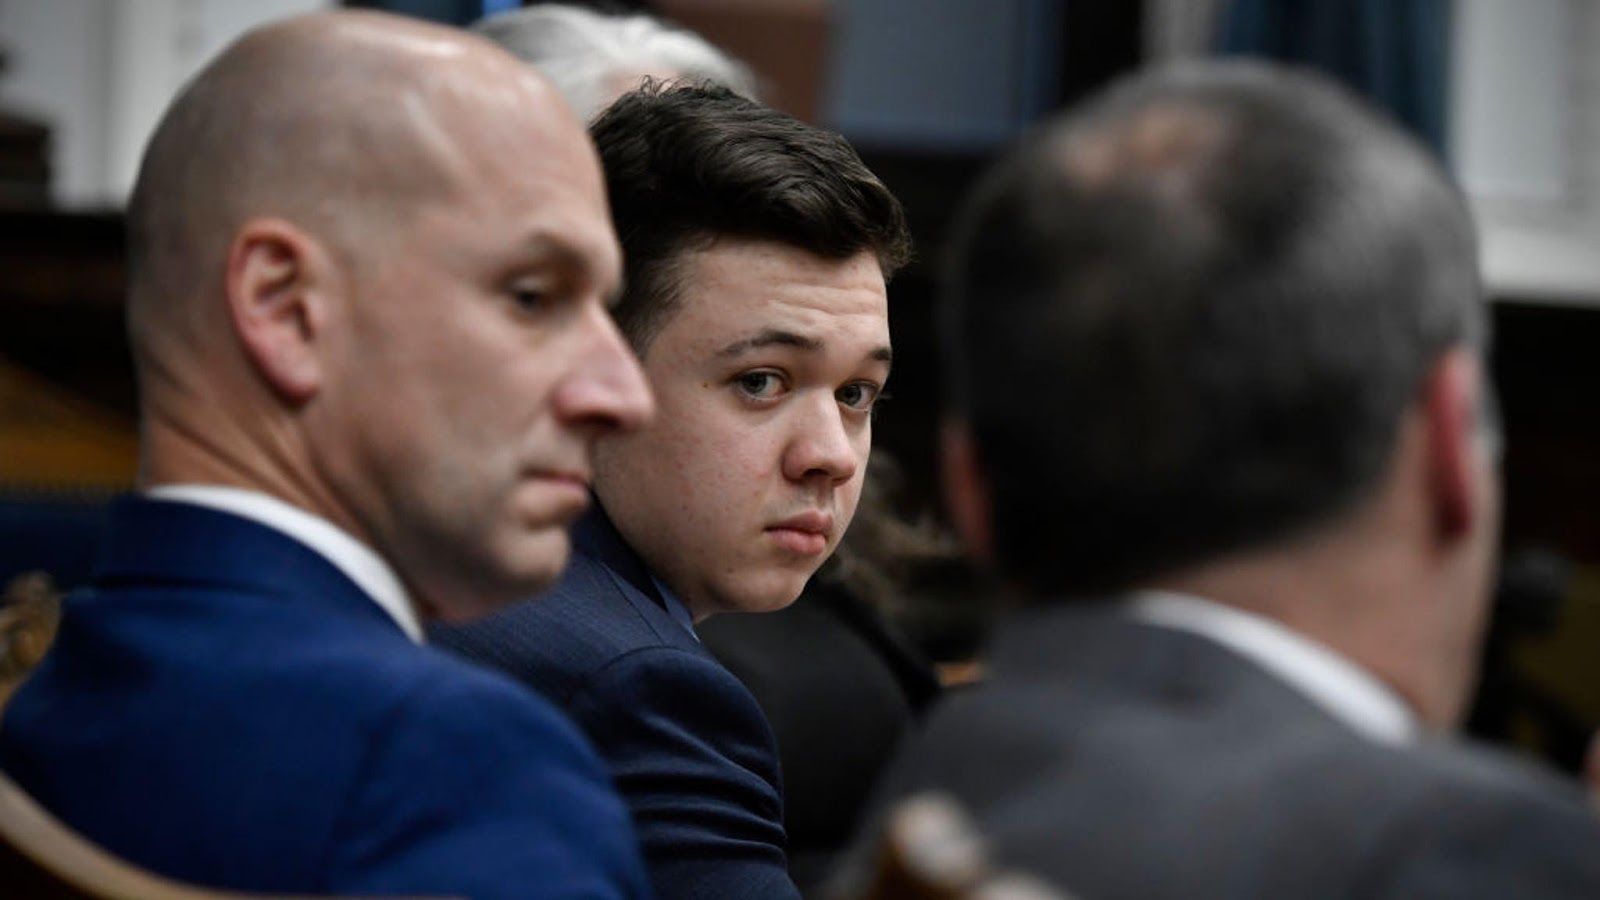 Kyle Rittenhouse, center, looks over to his attorneys as the jury is dismissed for the day during his trial at the Kenosha County Courthouse on November 18, 2021 in Kenosha, Wisconsin.